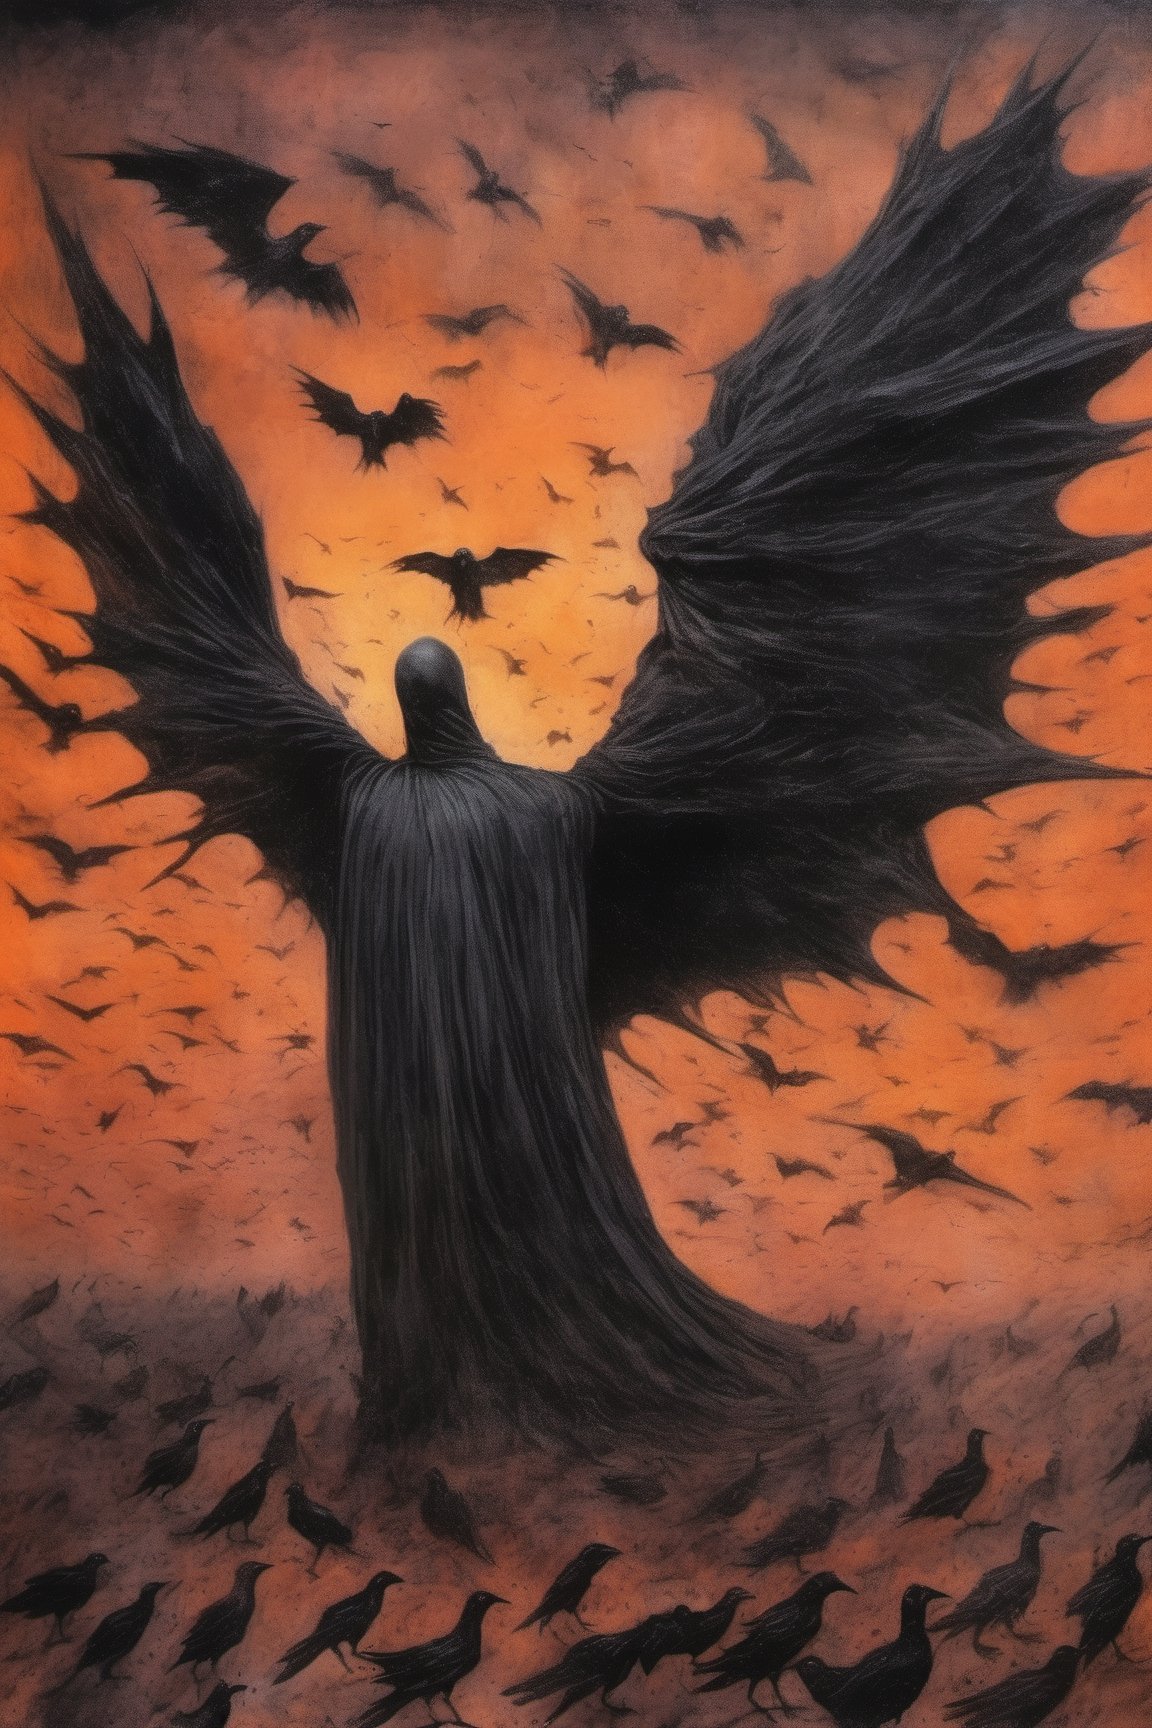 ((The Emperor of Darkness comes down from the sky)). Lovecraft style, Flocks of flying crows, corpses emerging from the ground, Tenebrism, strange, multi-toned orange and black gradient tumultuous sky, dark core, moderately controlled chaos, ghost core, Nicholas Samori